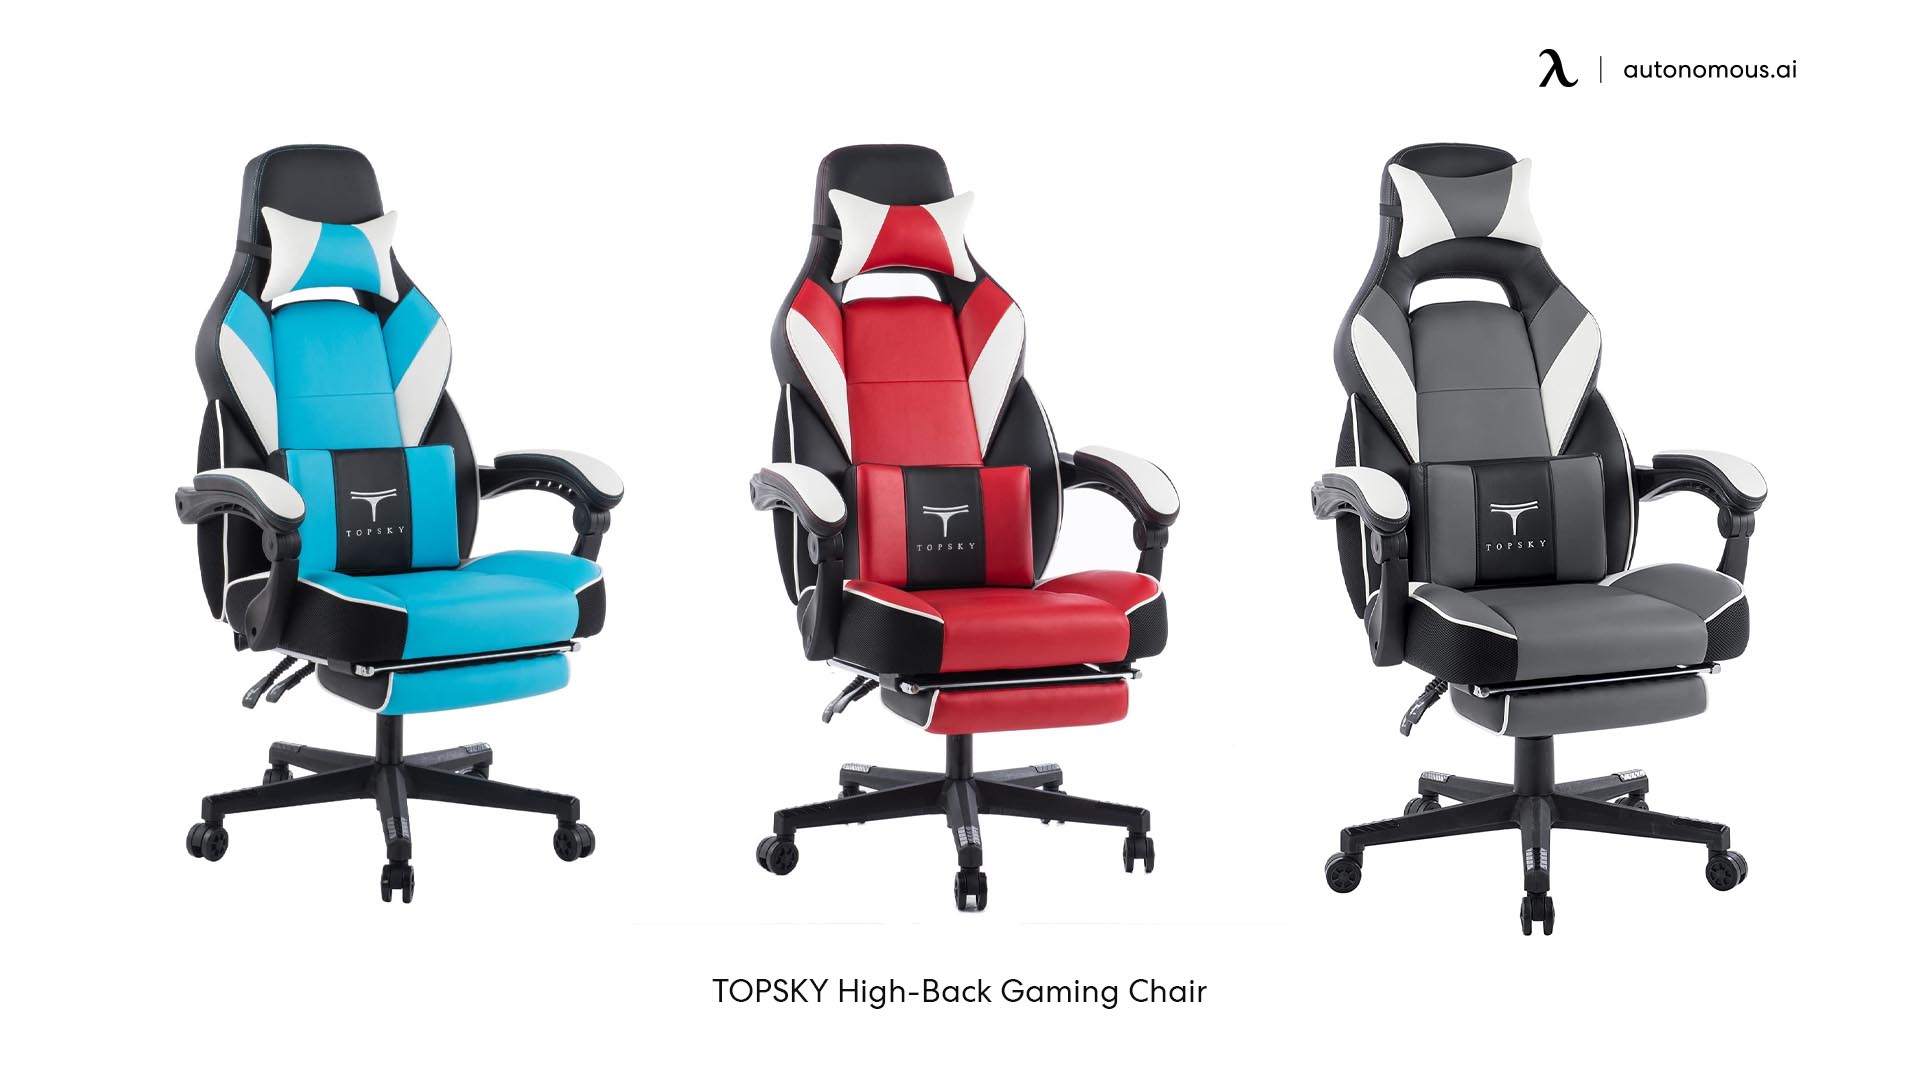 TOPSKY pro gaming chair